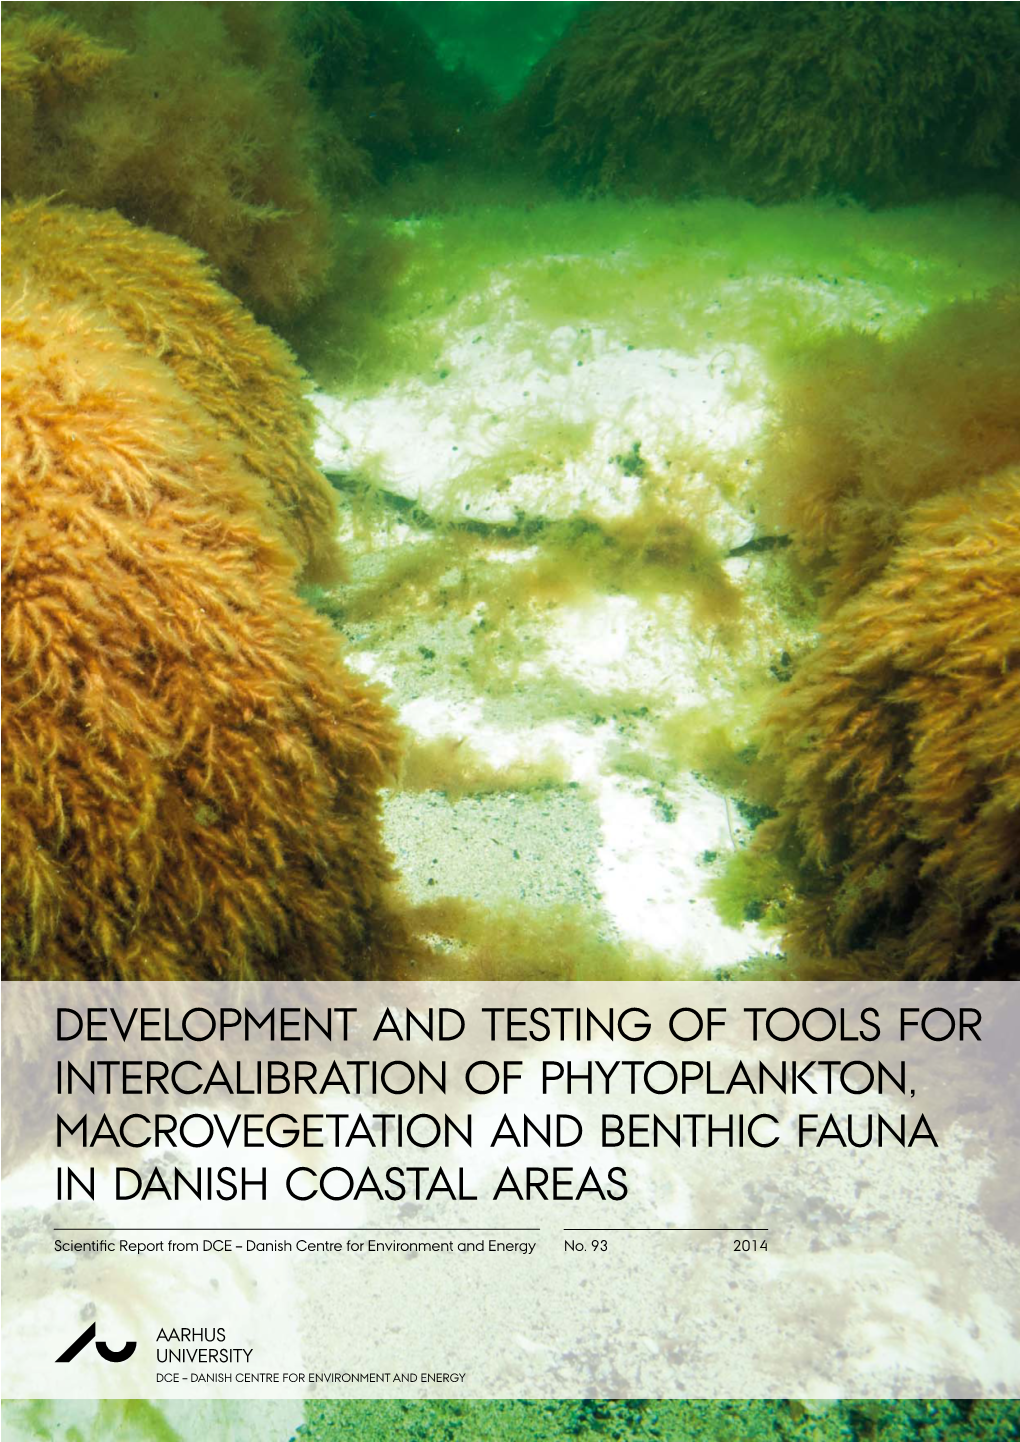 Development and Testing of Tools for Intercalibration of Phytoplankton, Macrovegetation and Benthic Fauna in Danish Coastal Areas